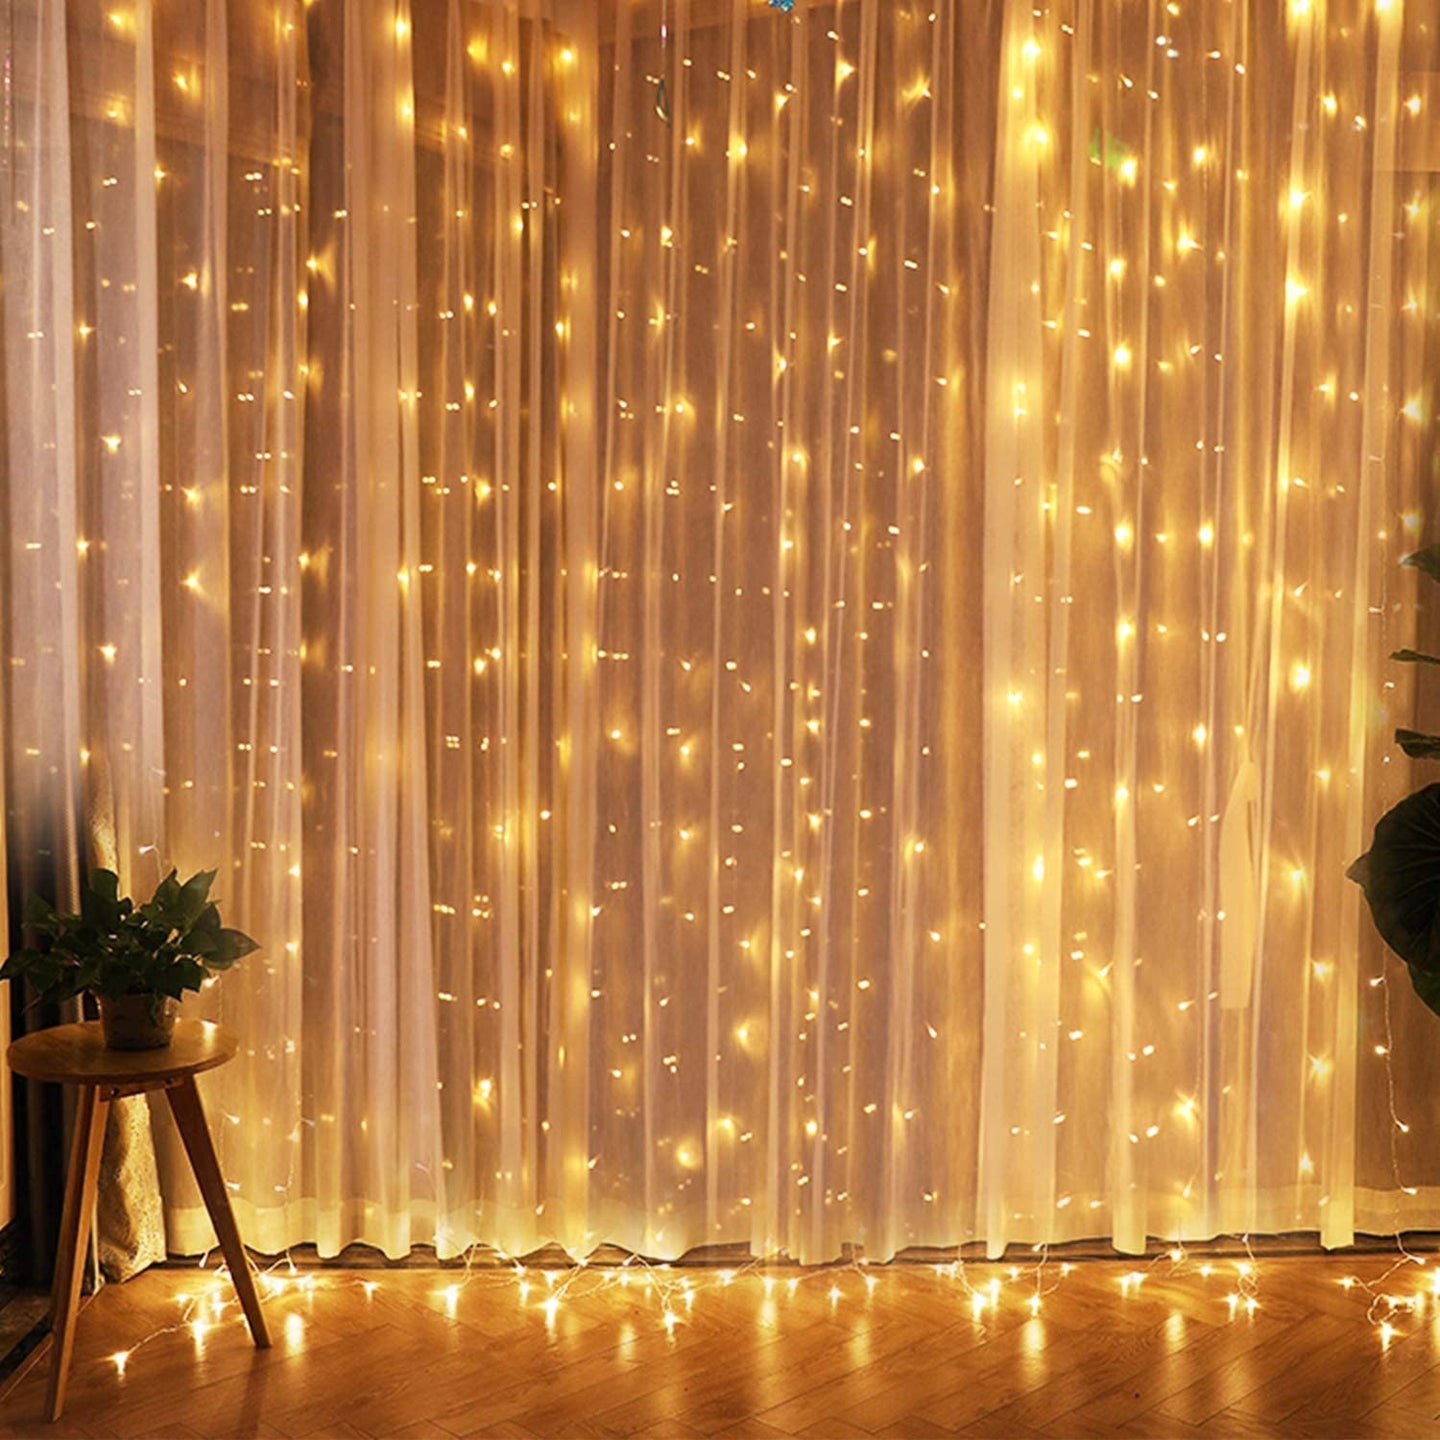 8 Modes Curtain Lights 9.8x6.6 Foot 224 LED String Lights Fairy String Lights for Wedding Party Home Garden Indoor Outdoor Wall Backdrops Decorations Waterproof UL Safety Standard Warm White